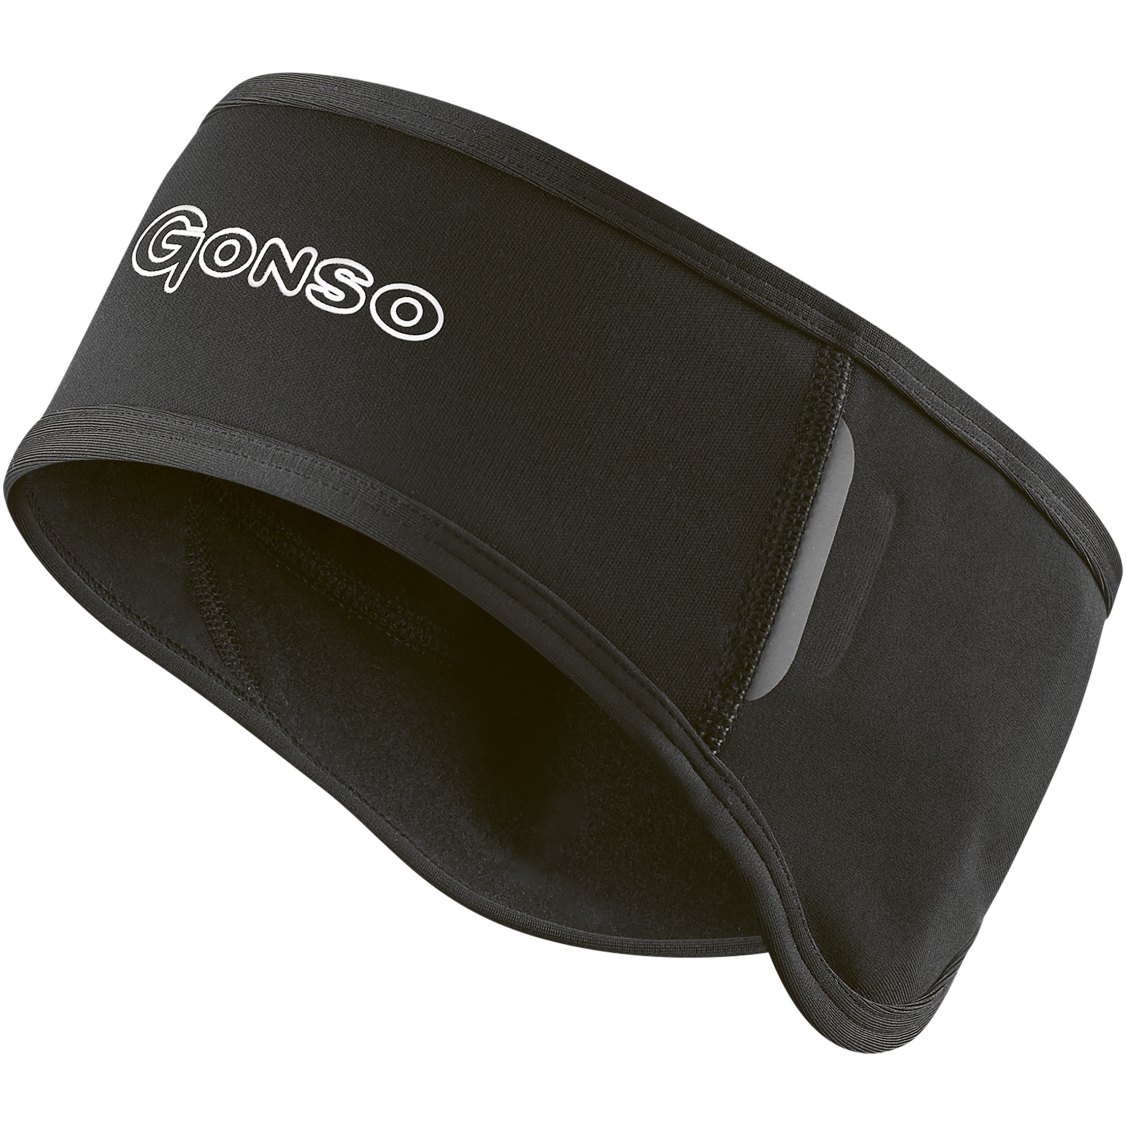 Picture of Gonso Thermo Headband - Black